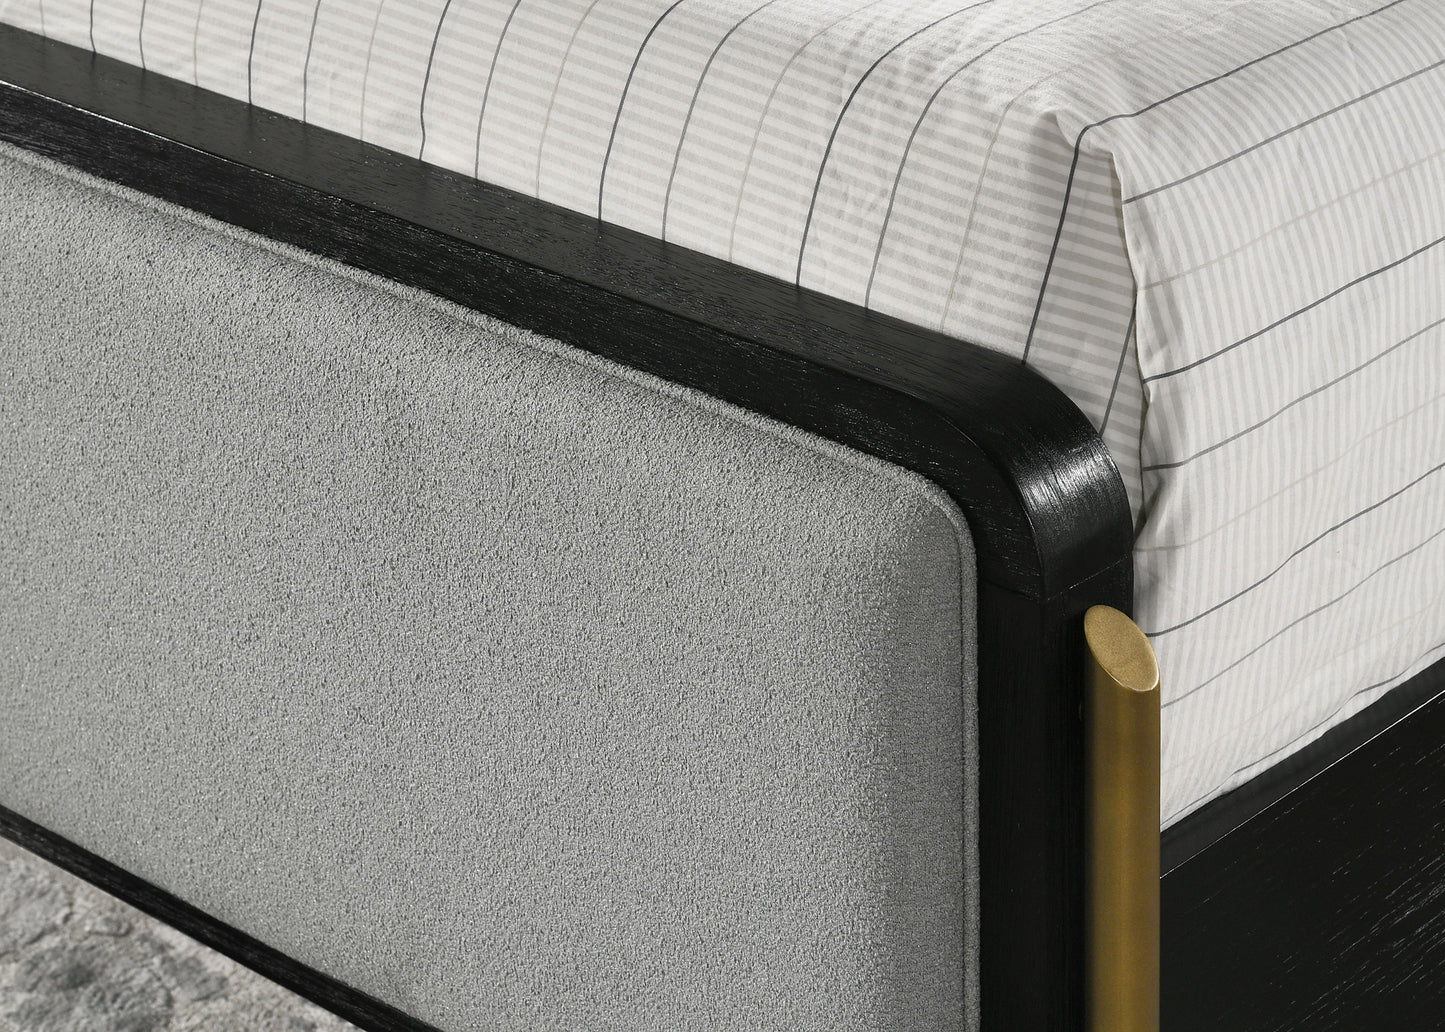 Arini Upholstered Queen Panel Bed Black and Grey